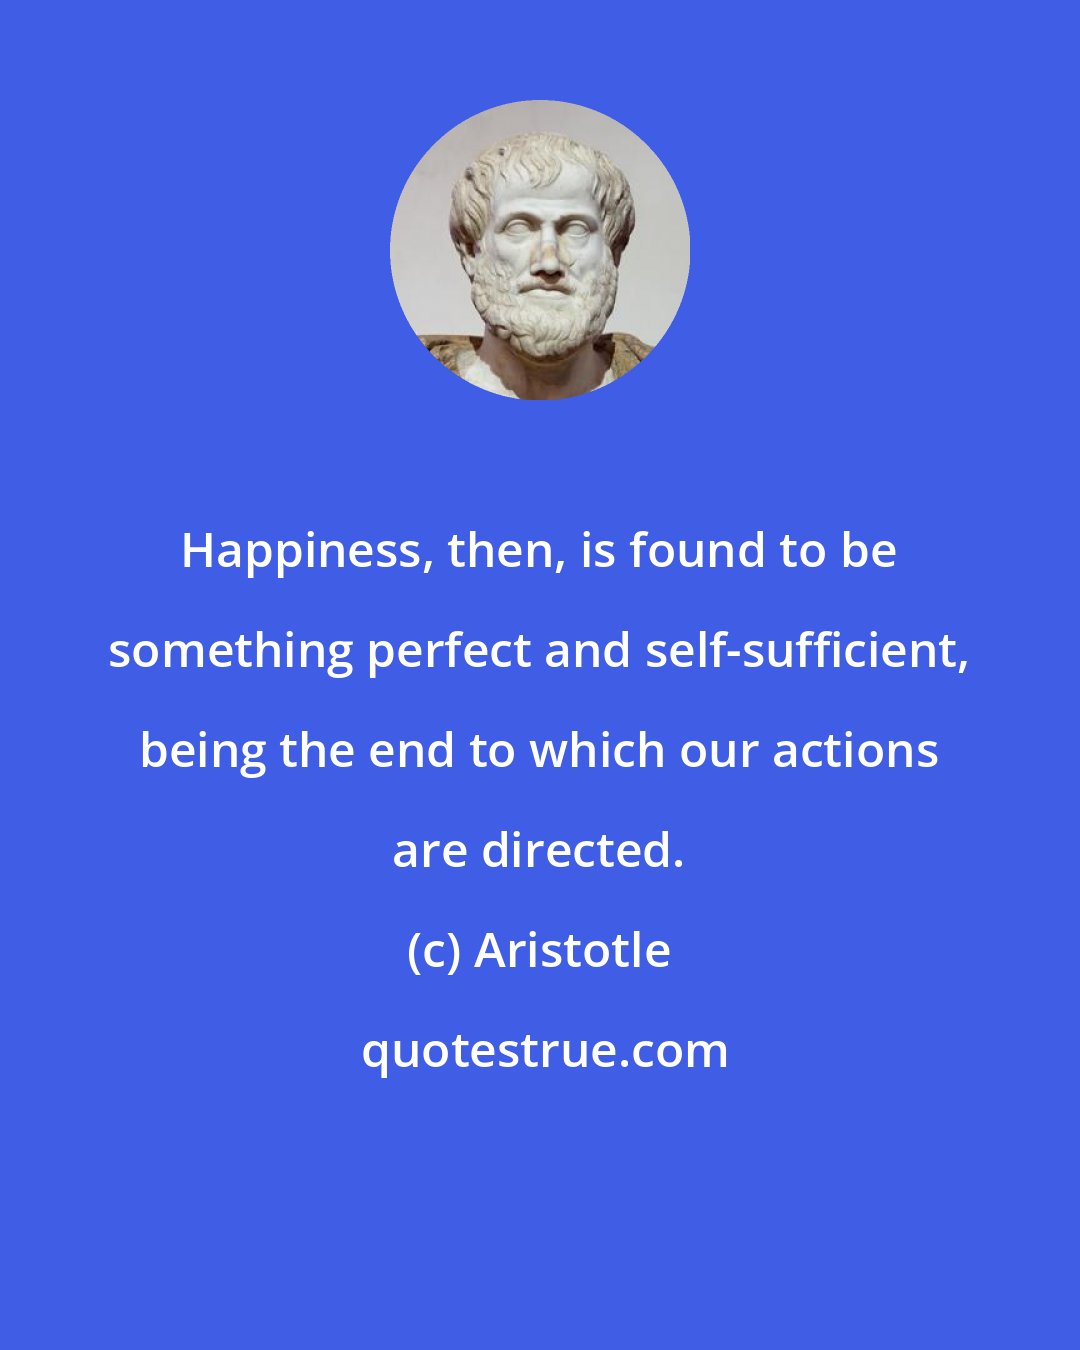 Aristotle: Happiness, then, is found to be something perfect and self-sufficient, being the end to which our actions are directed.